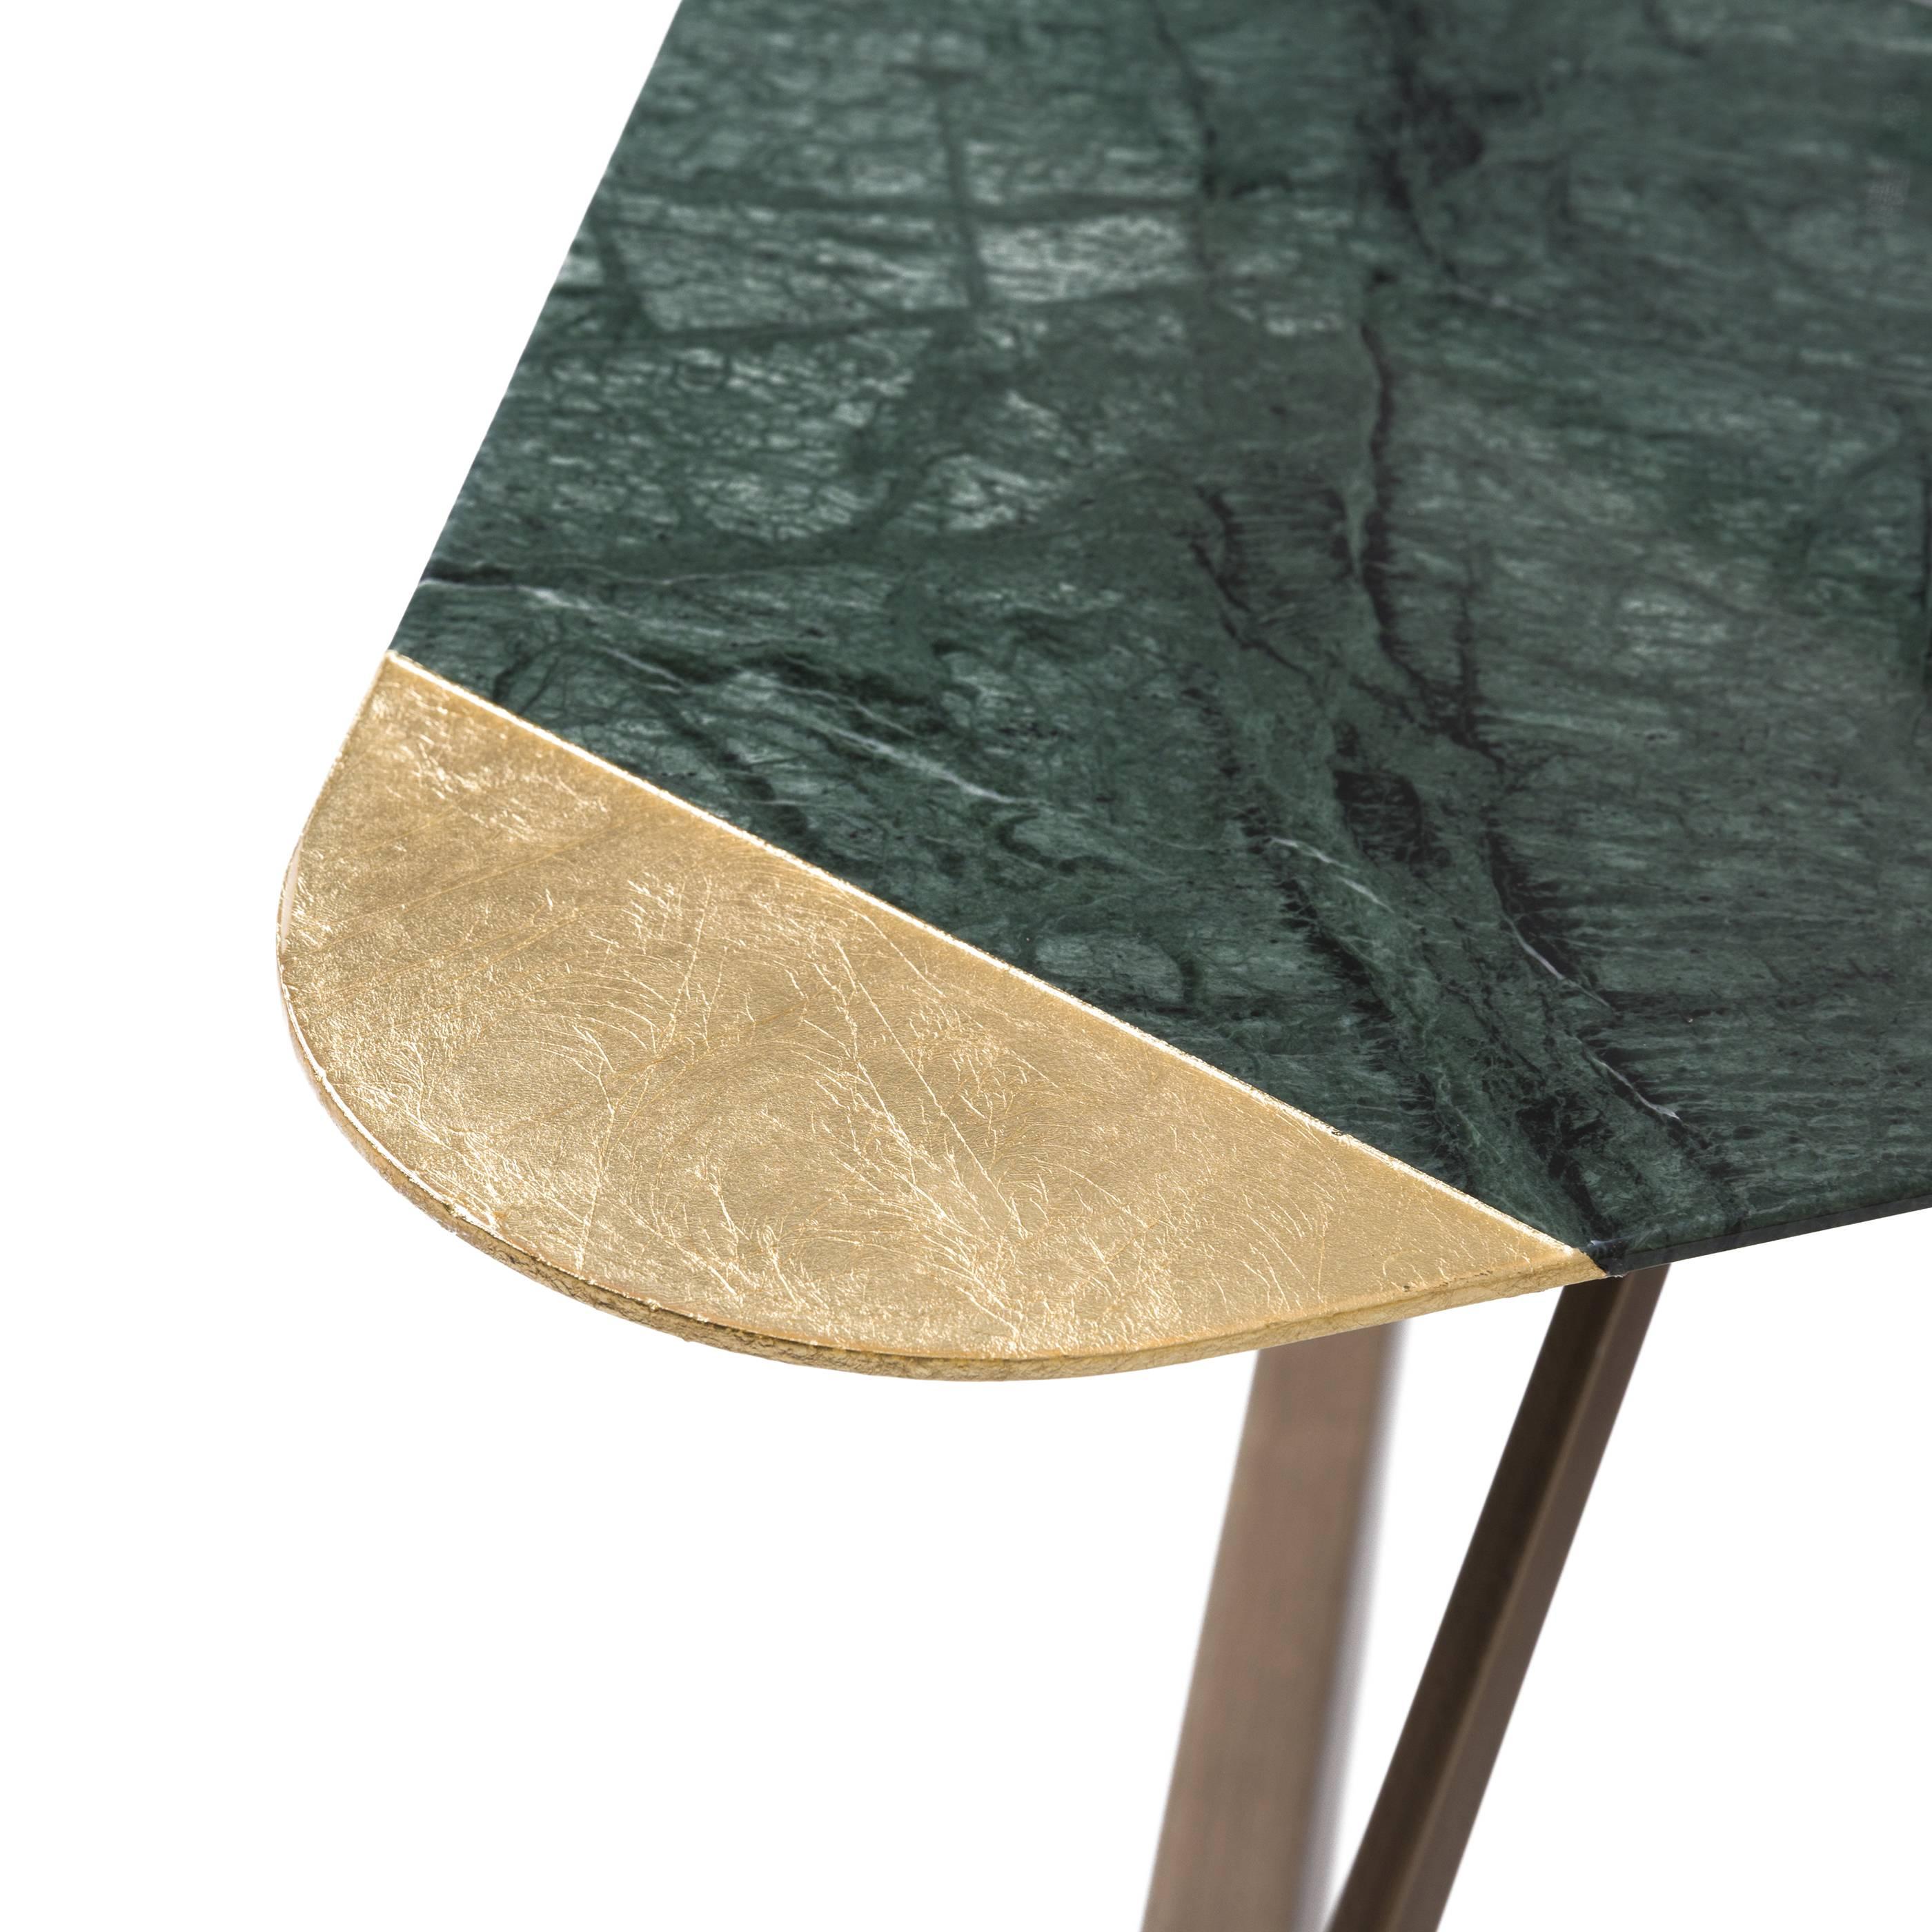 Golden Archer coffee table by Alex Mint

Marble-top and brushed bronze. 
Verde Guatemala - gold Leaf

The materials
Marble and stone collected from all over the world and combined carefully with timber and metal details are the main materials